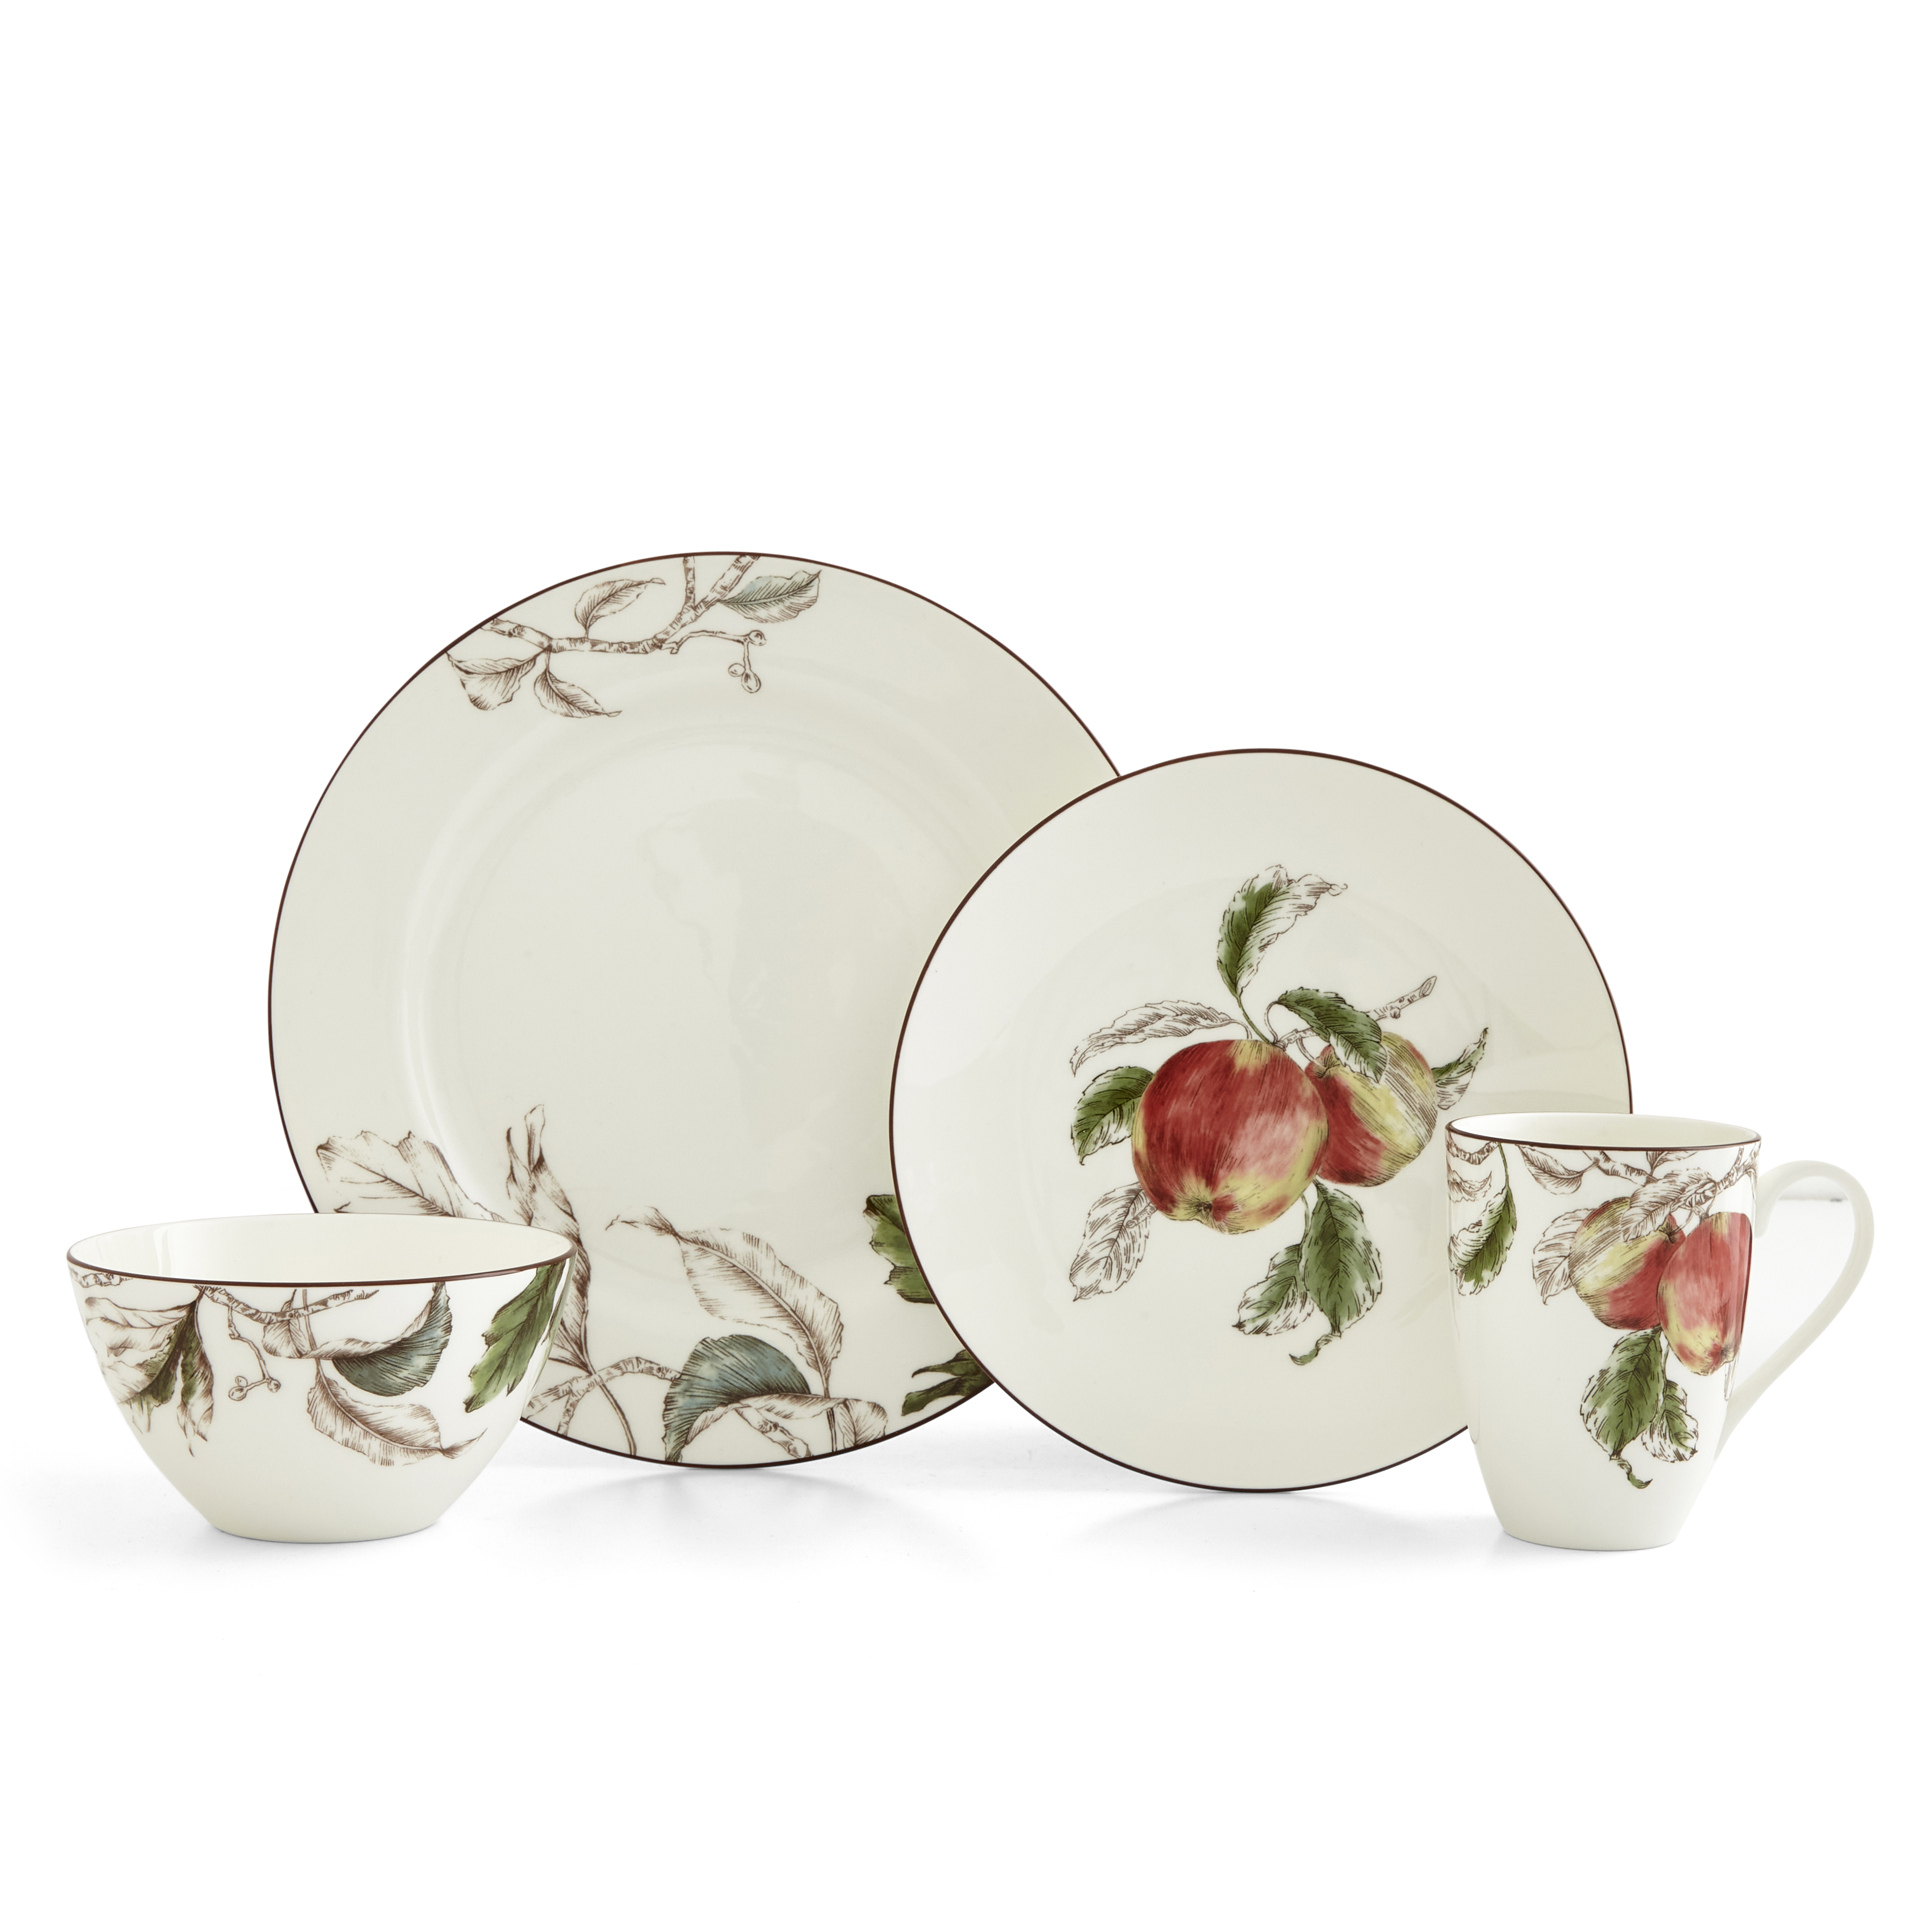 Nature's Bounty 4 Piece Place Setting, Apple image number null